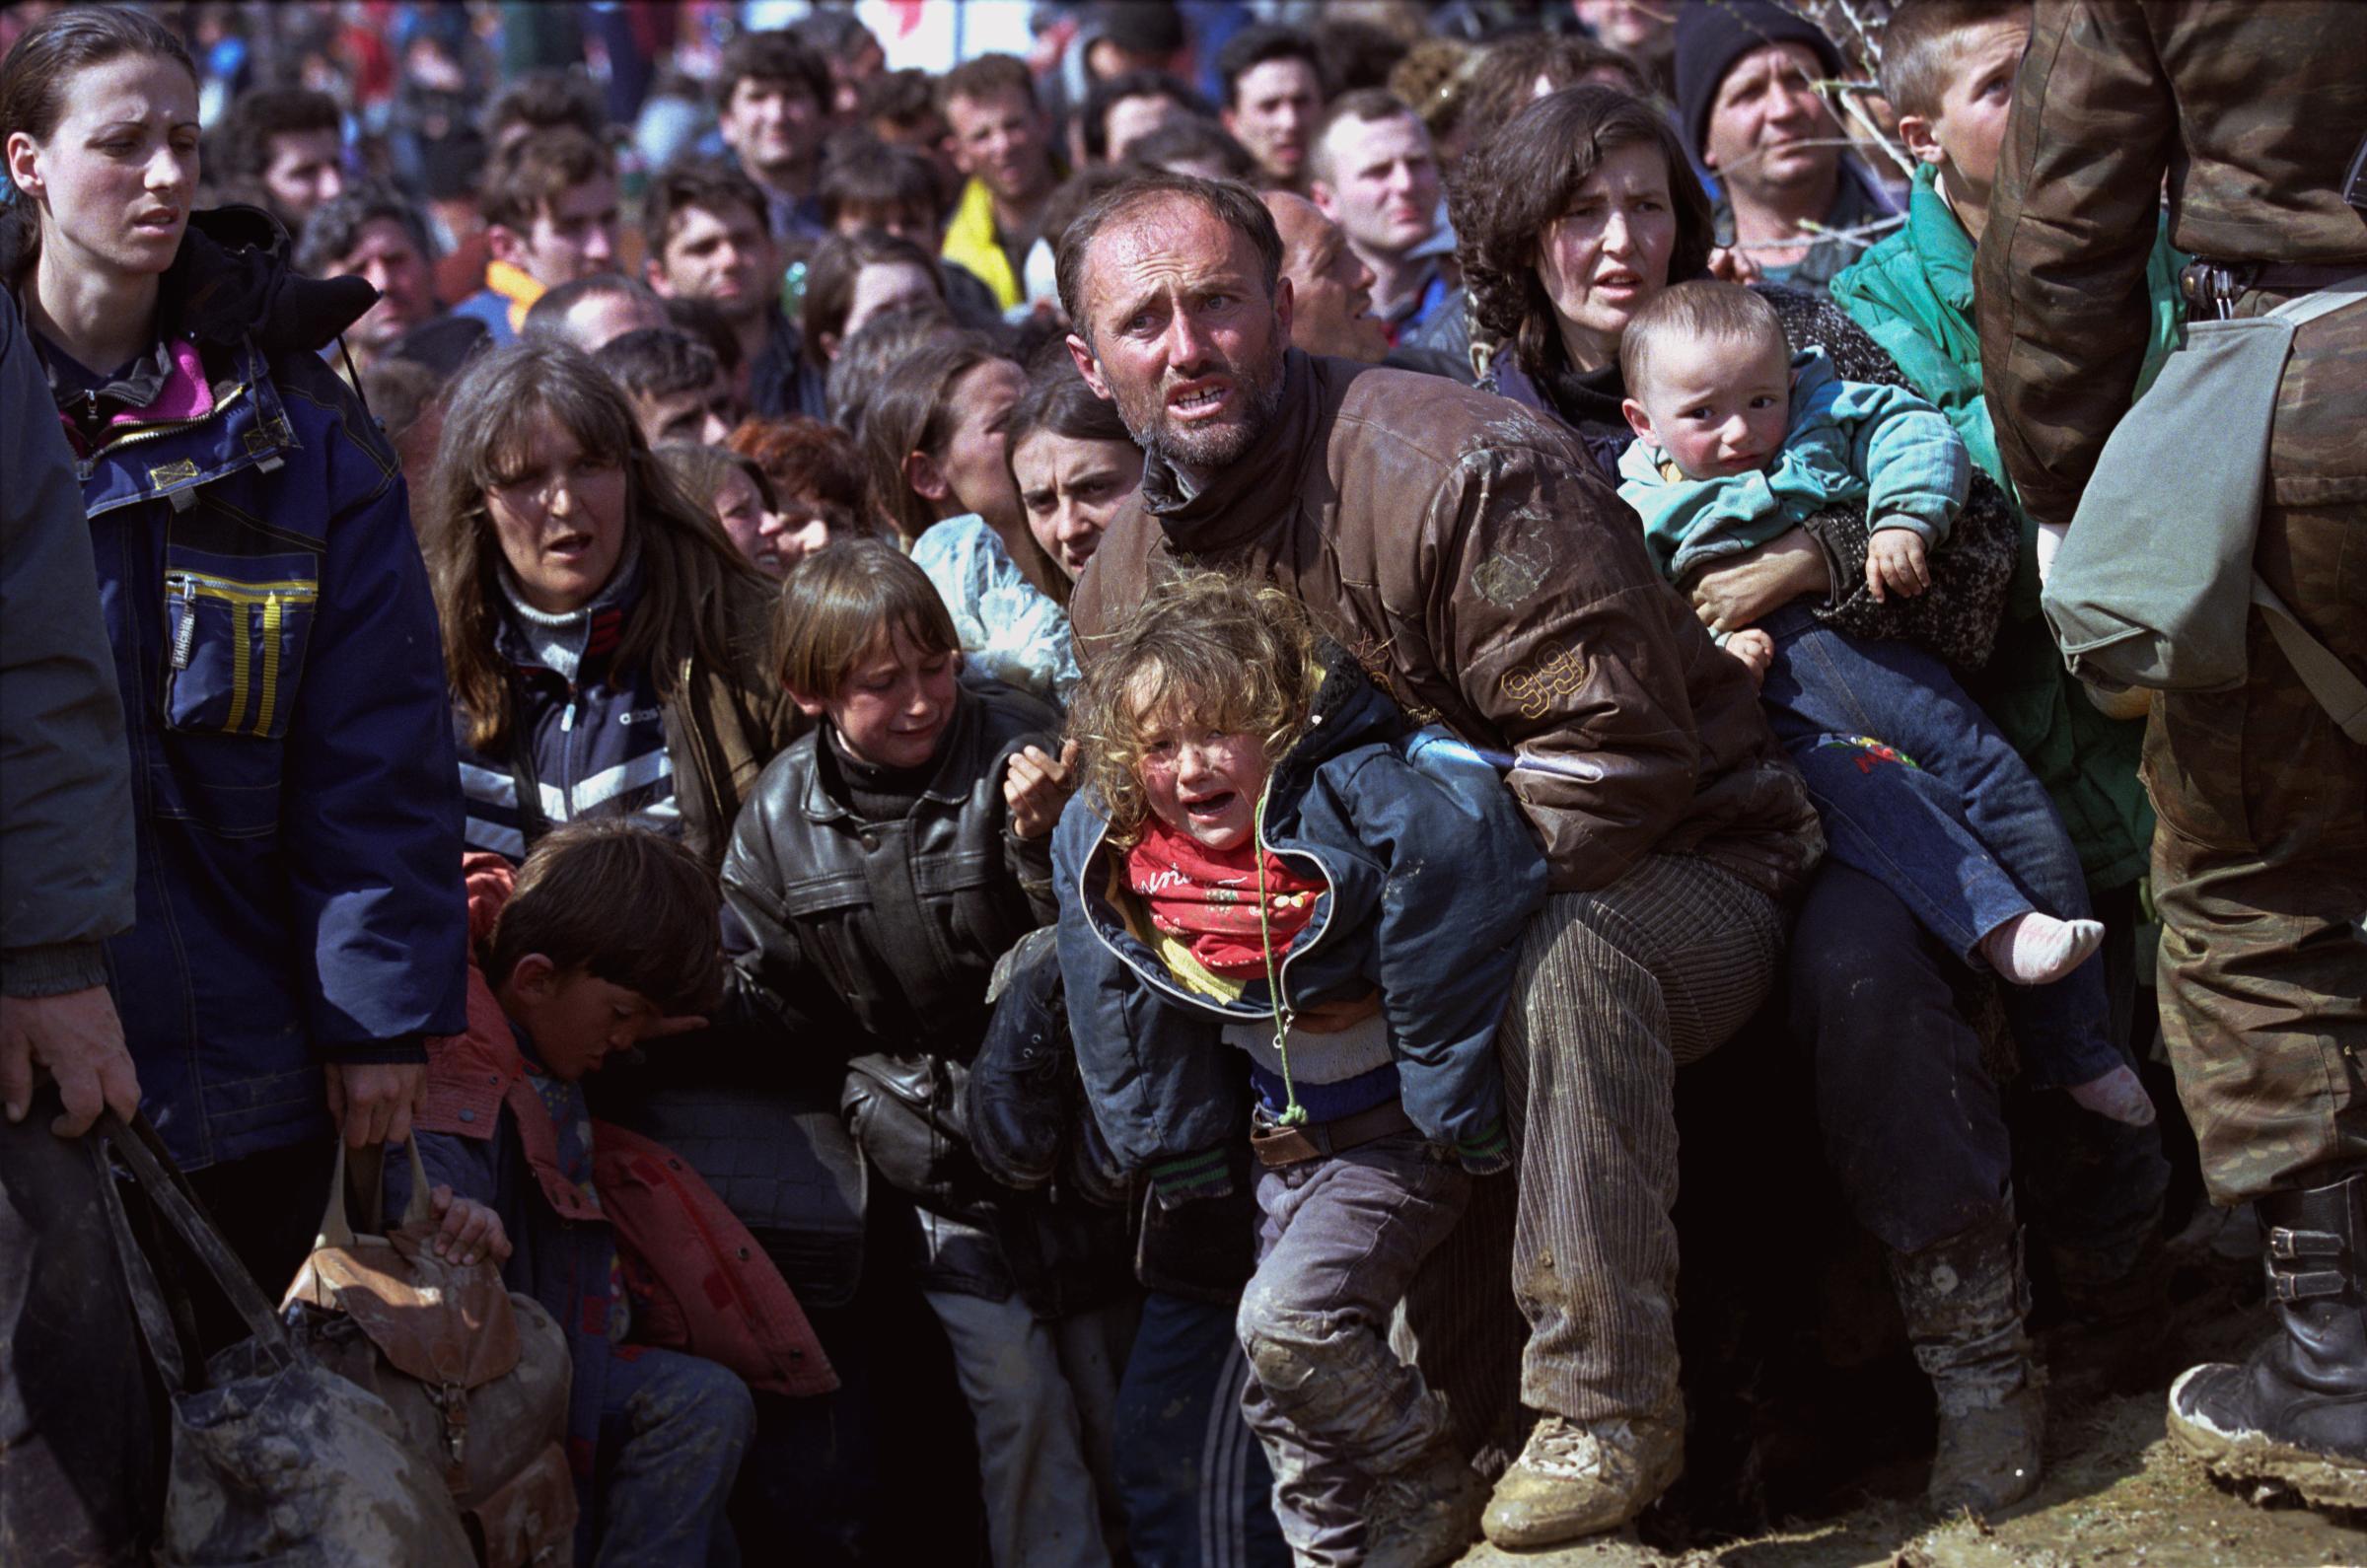 A father pleads with Macedonian soldiers to allow his sick child into a medical tent on the Macedonian side of the border.